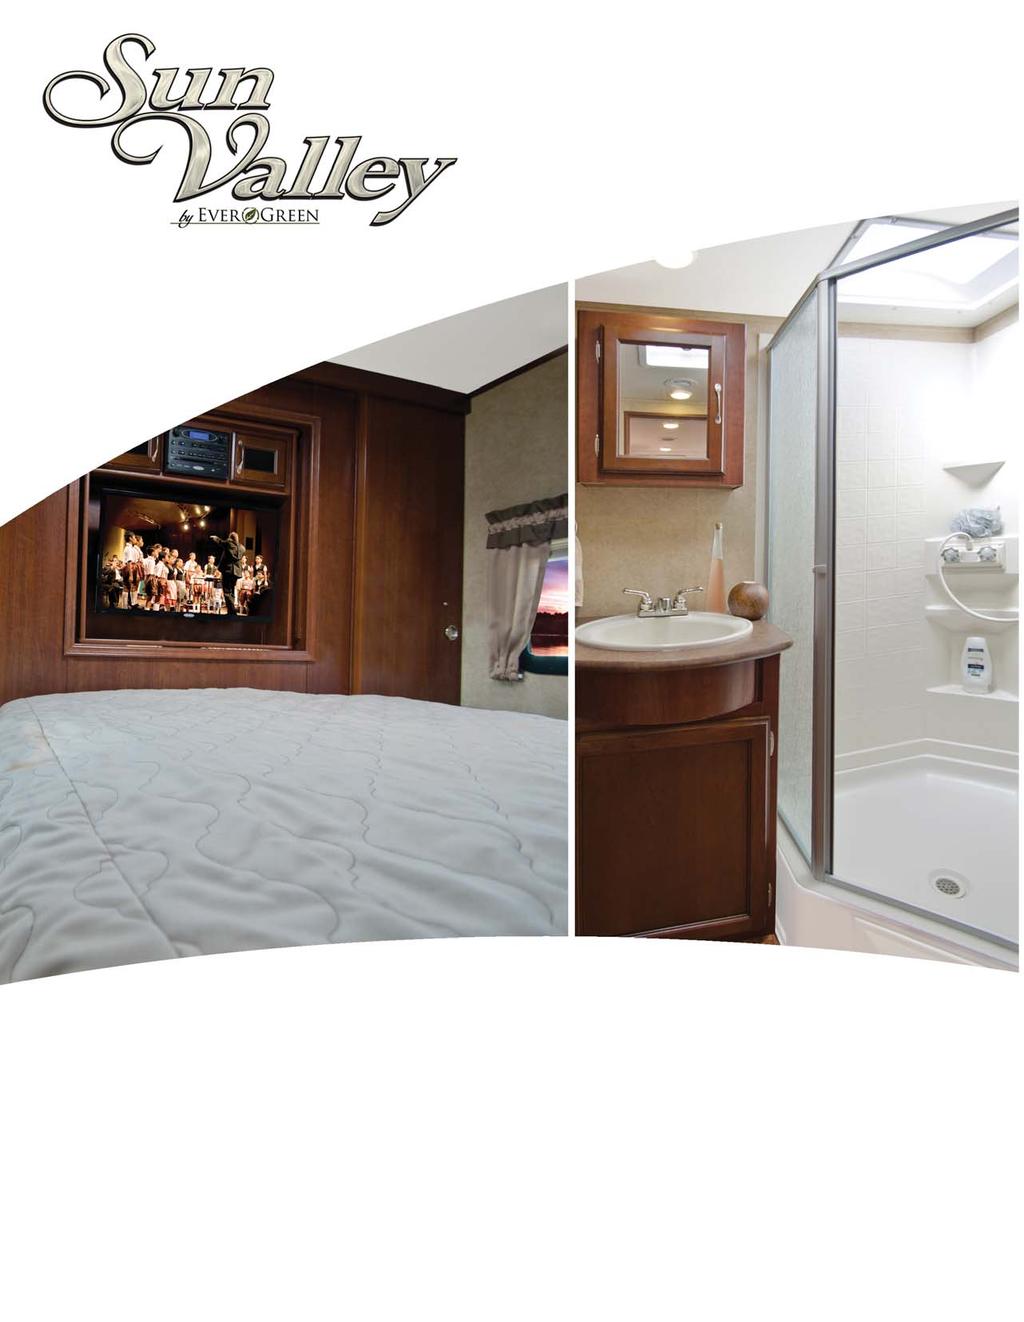 Your bathroom is complete with a full tub or neo/angled shower, foot-flush toilet, and large medicine cabinet with mirror, power exhausts fan, brushed nickel